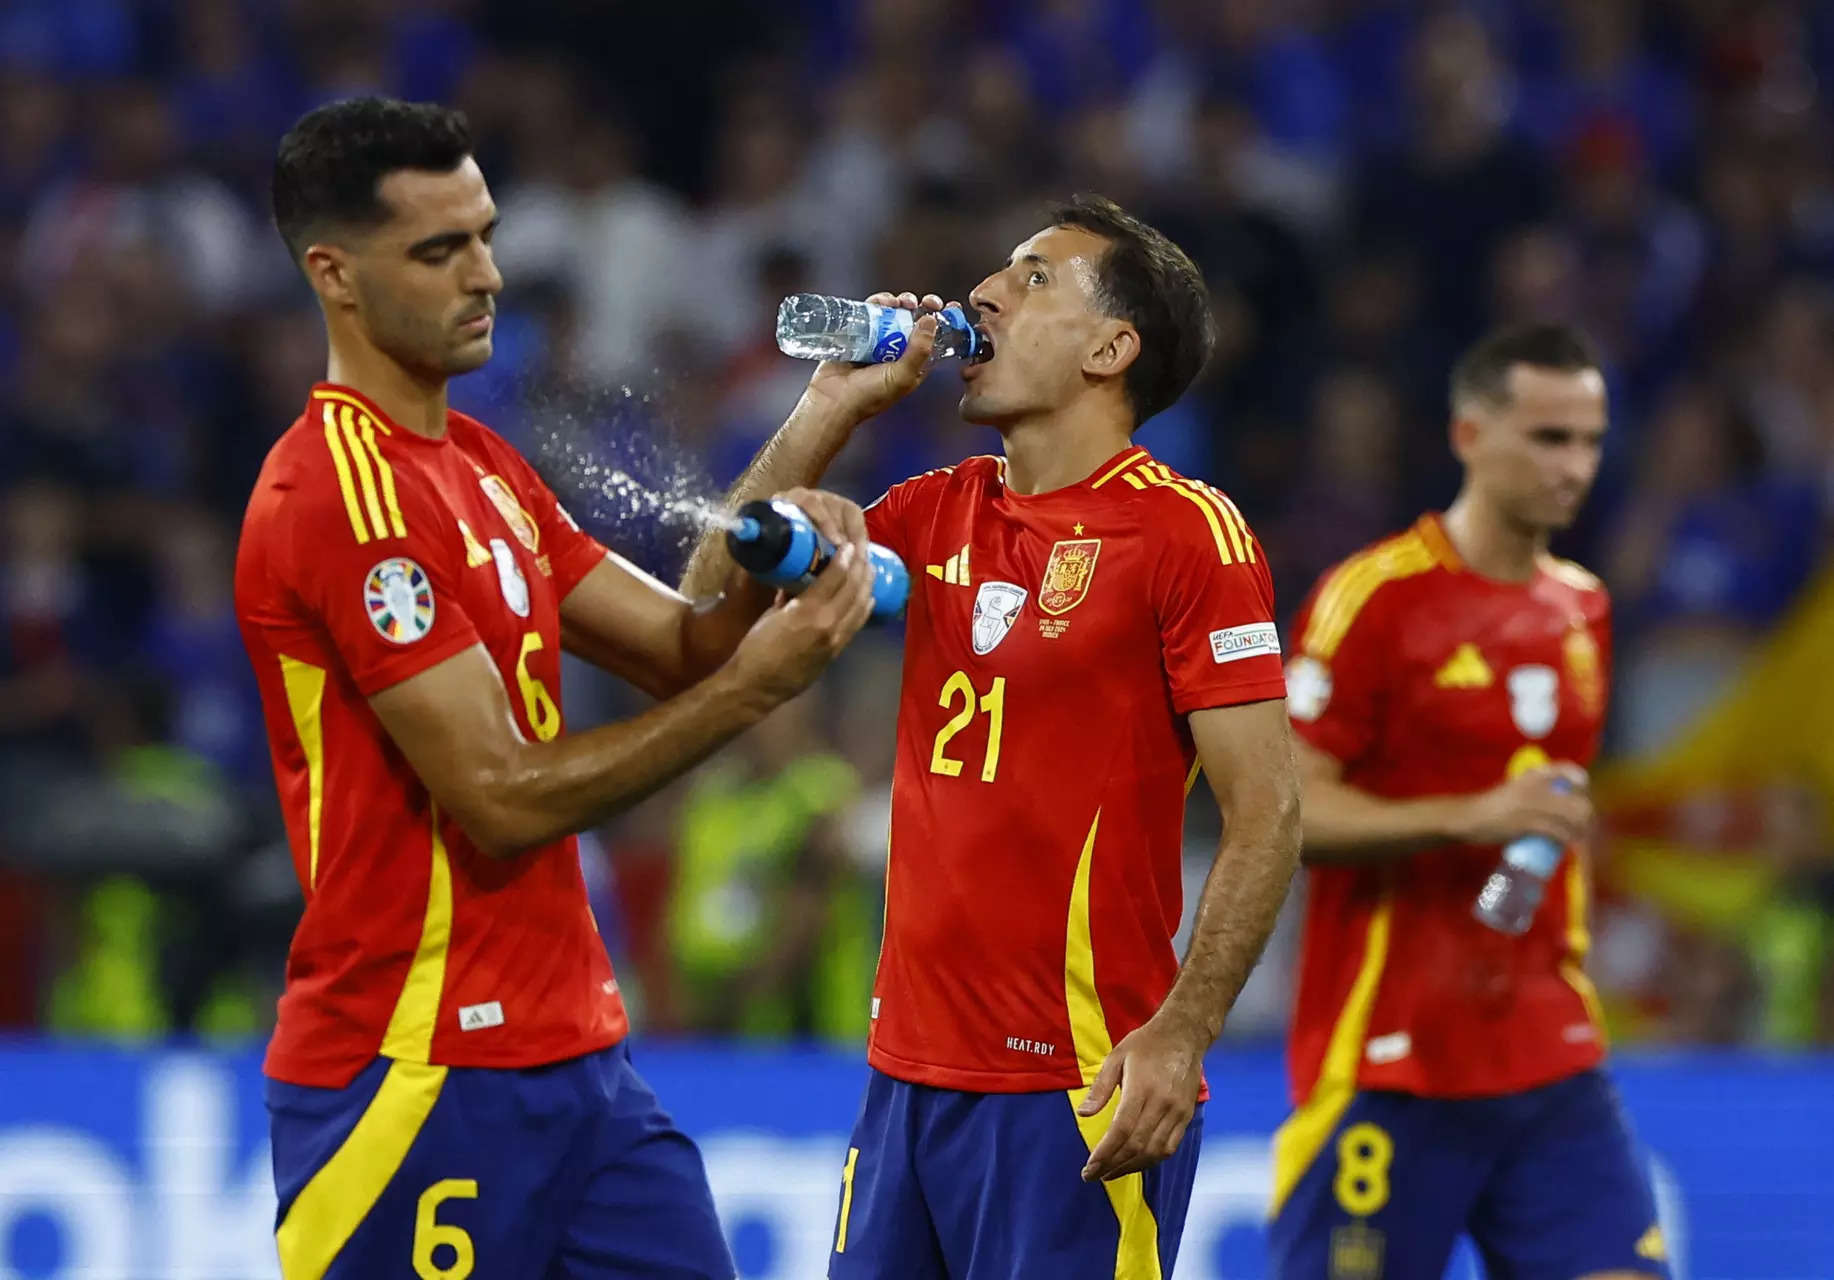 Will Spanish captain be able to play in Euro 2024 final after freak injury? Here's what we know so far 